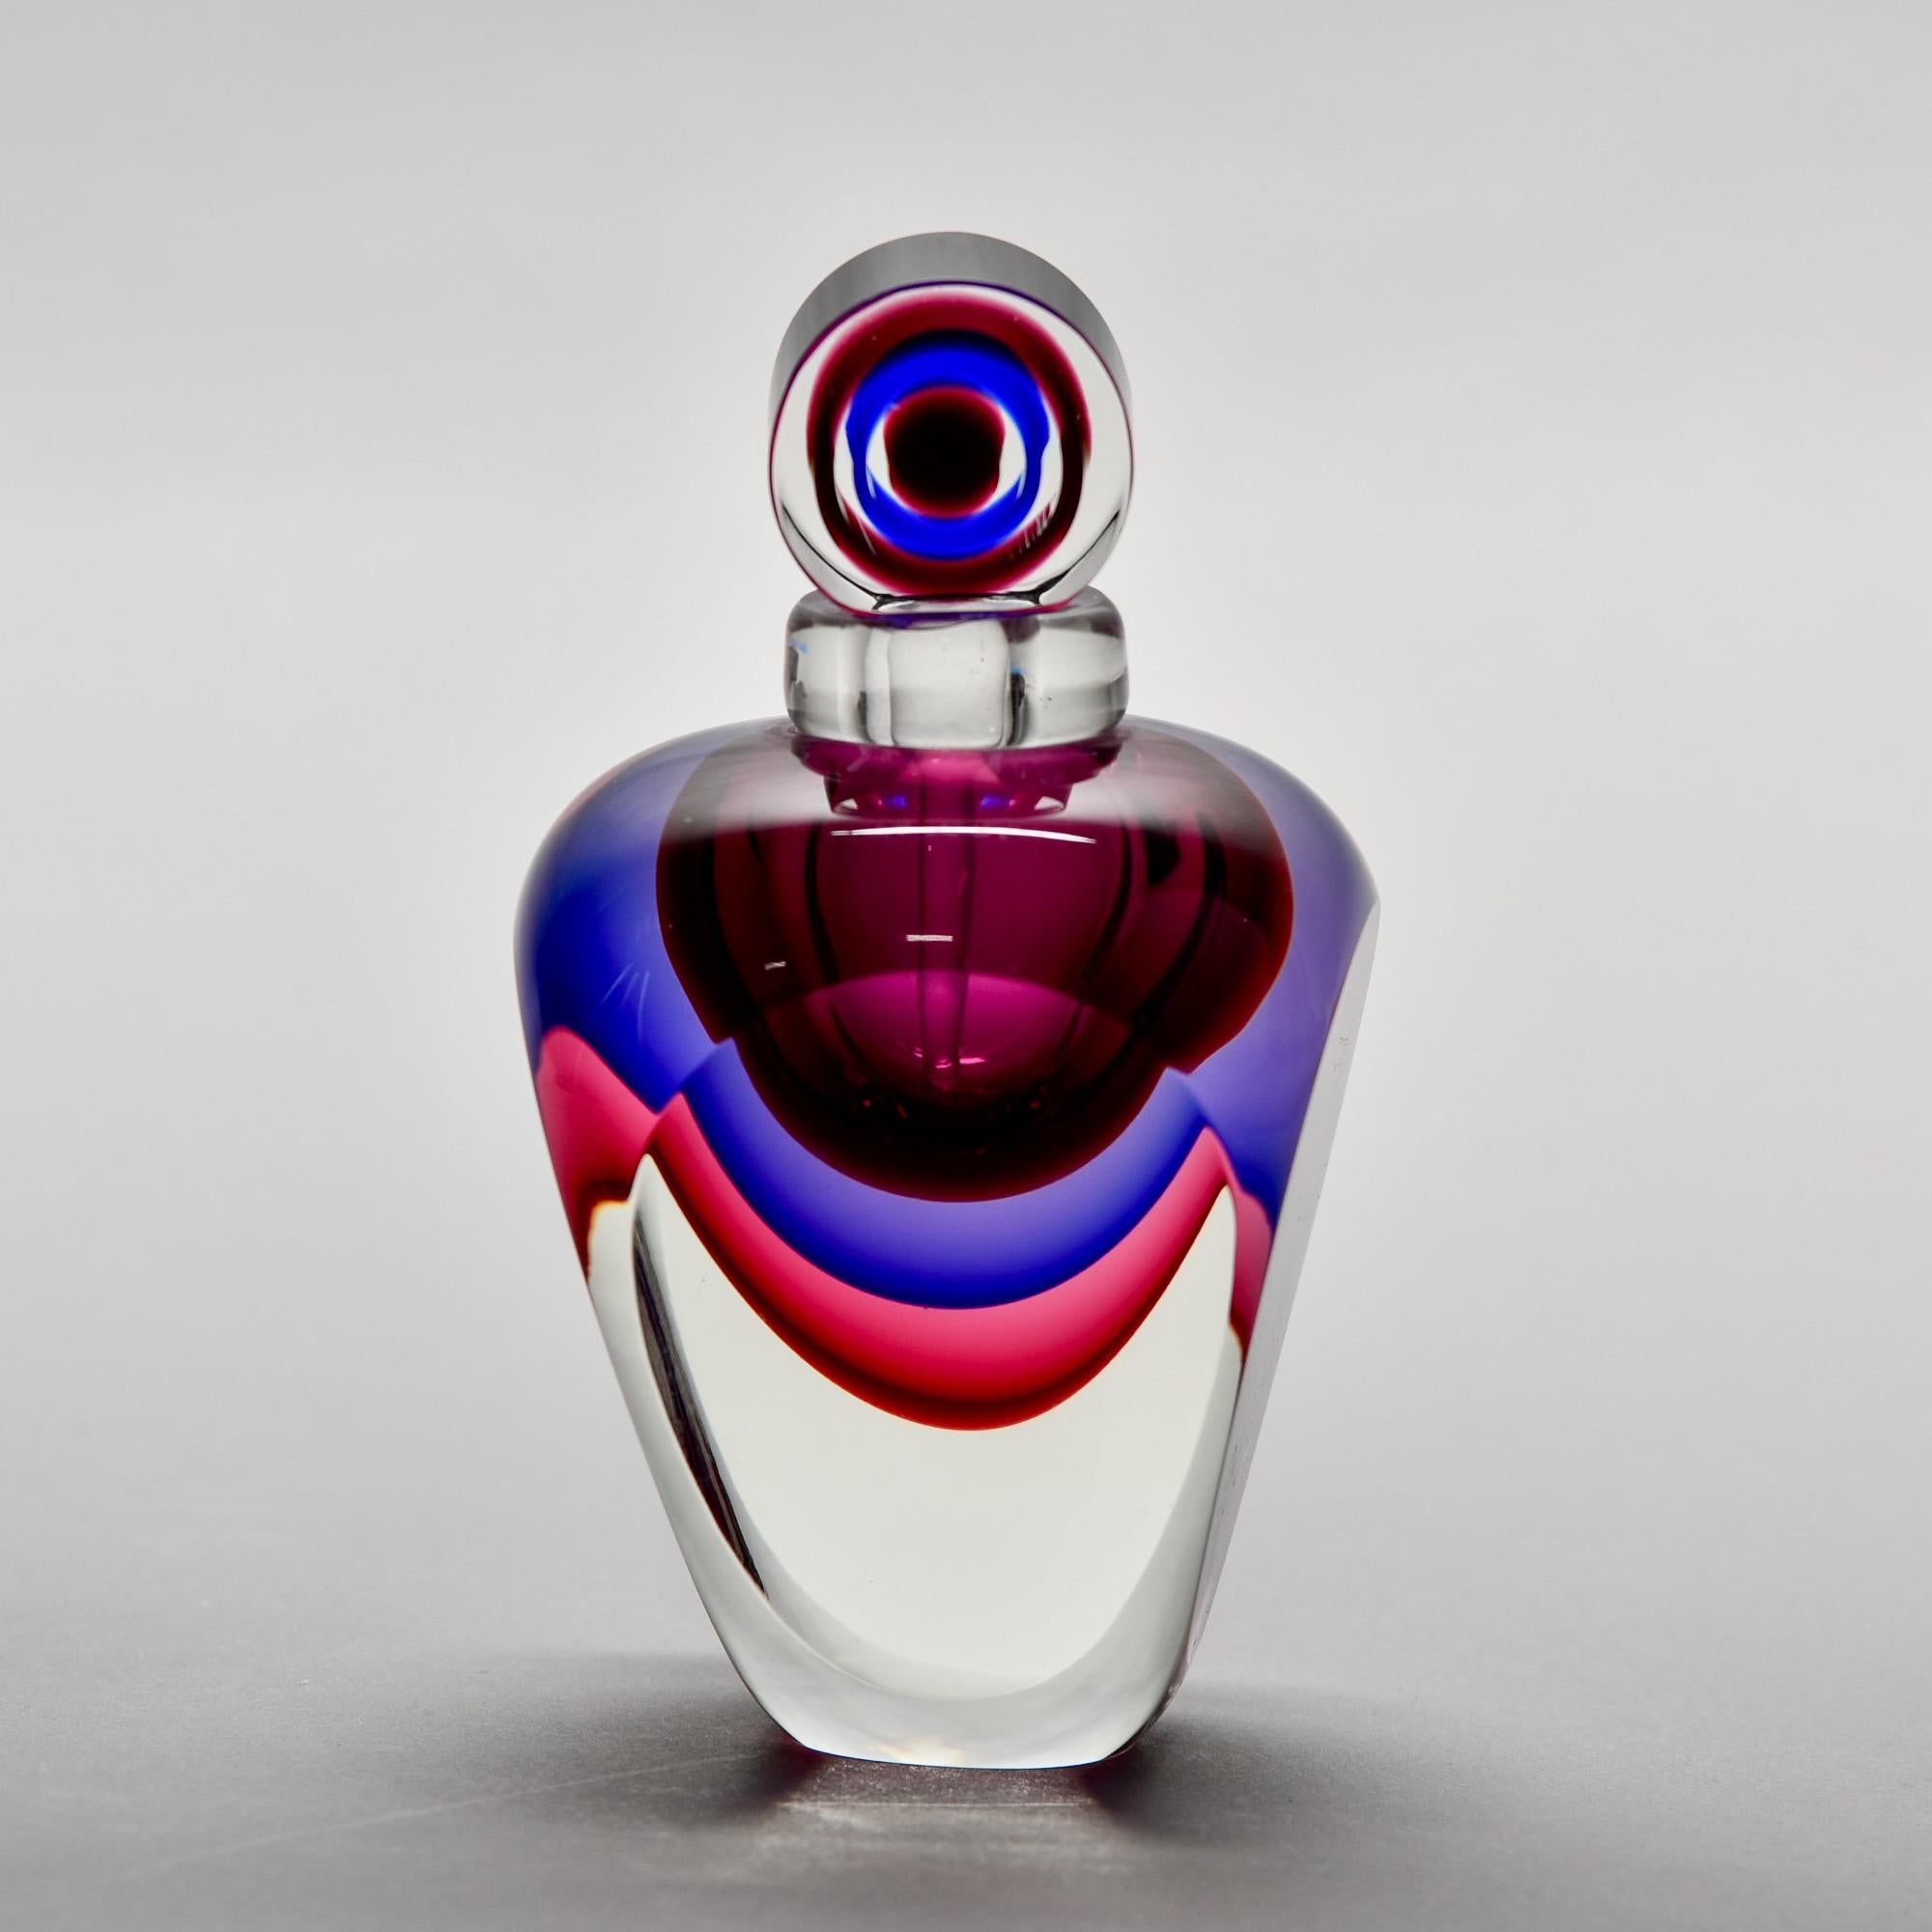 Found in Italy, this sommerso style Murano glass perfume bottle features heavy, clear glass with layers of fuchsia, violet and garnet in the vessel and stopper. Unsigned. New, with no flaws found.